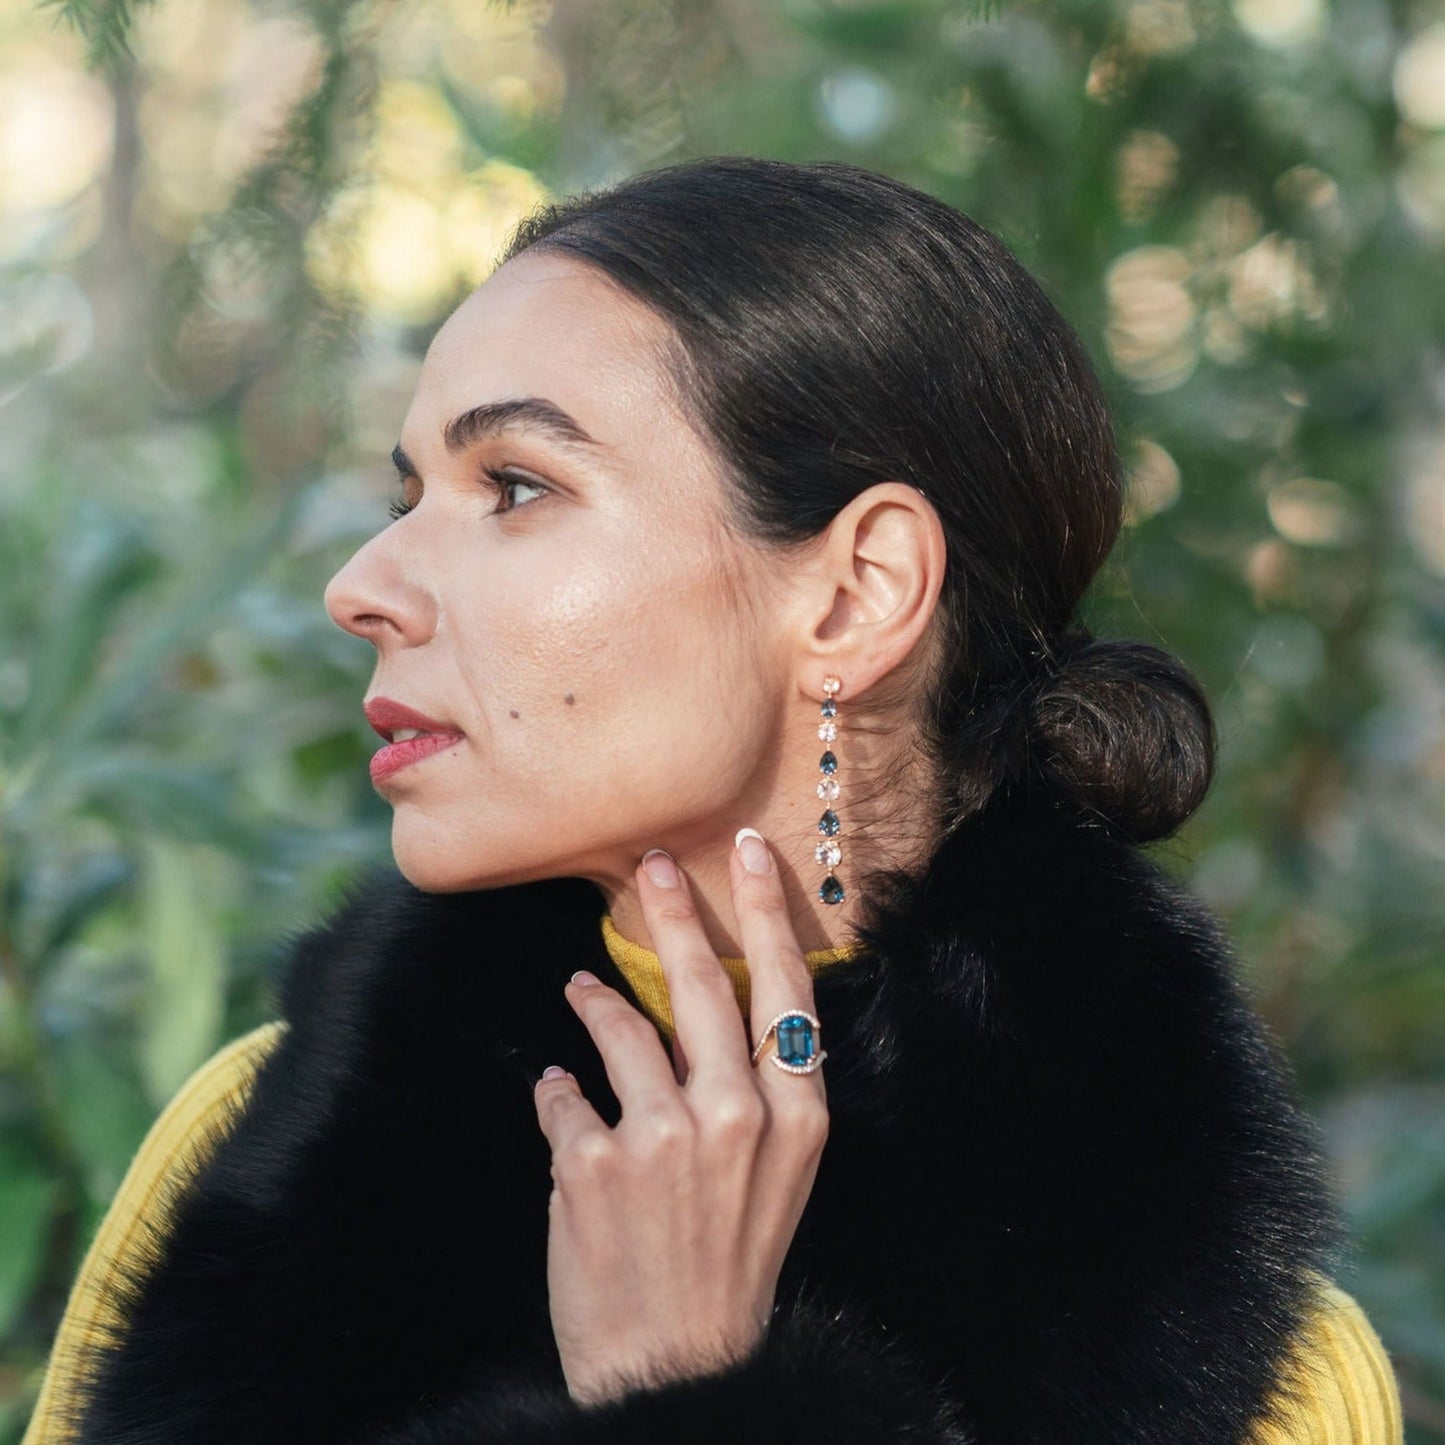 Model demonstrating the wear of the Luxury gemstone jewellery piece, the Long Teal Topaz and White Topaz Drop Earrings in 18ct Yellow Gold and the Gstaad Statement Ring – Gstaad Collection, Augustine Jewellery, Luxury Jewellery London.